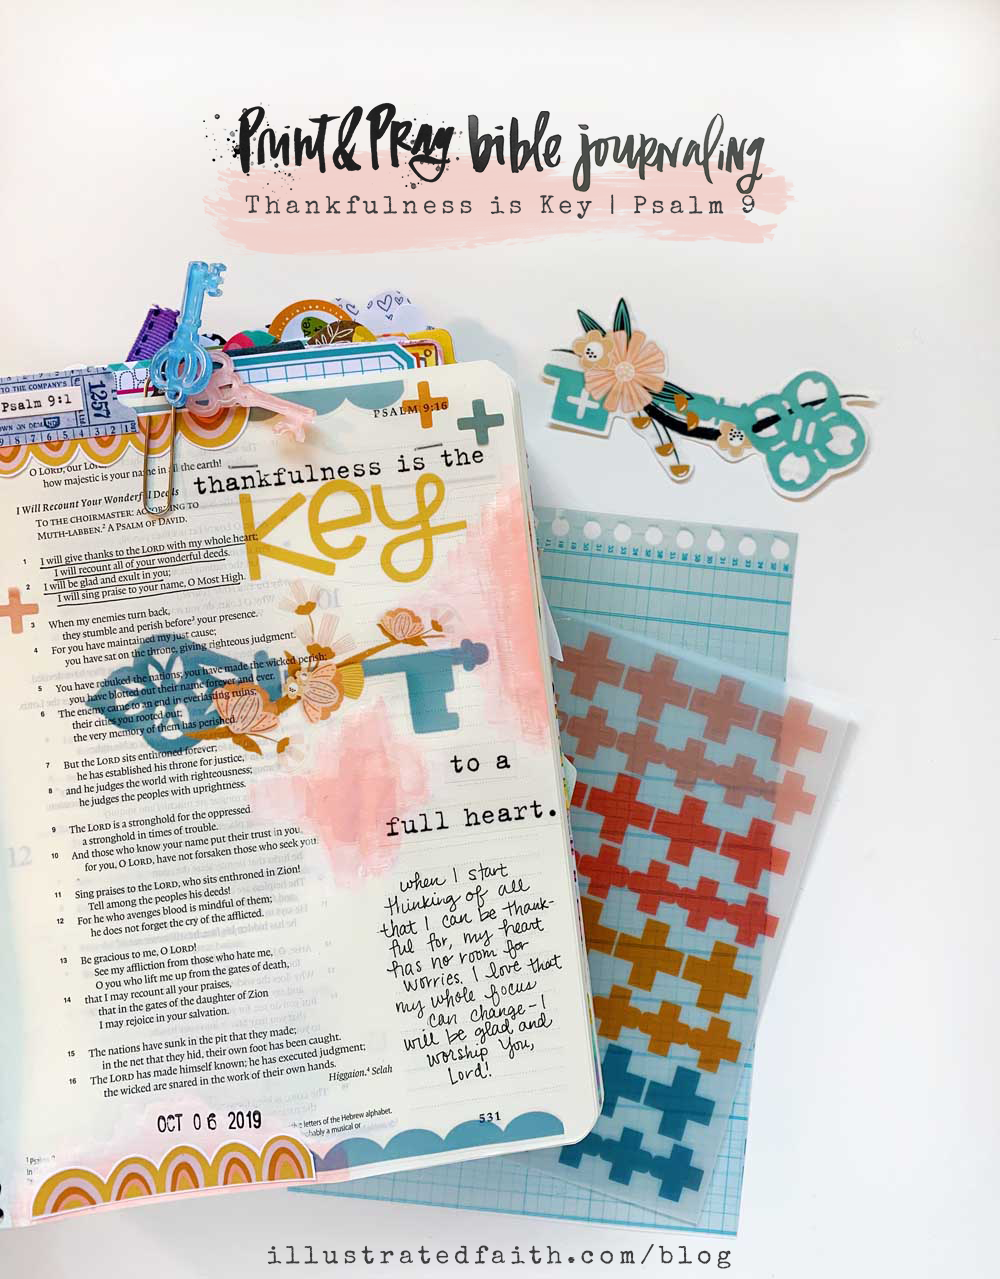 Print and Pray Hybrid Bible Journaling by Cristin Howell using digital printables | Thankfulness is Key | Psalm 9